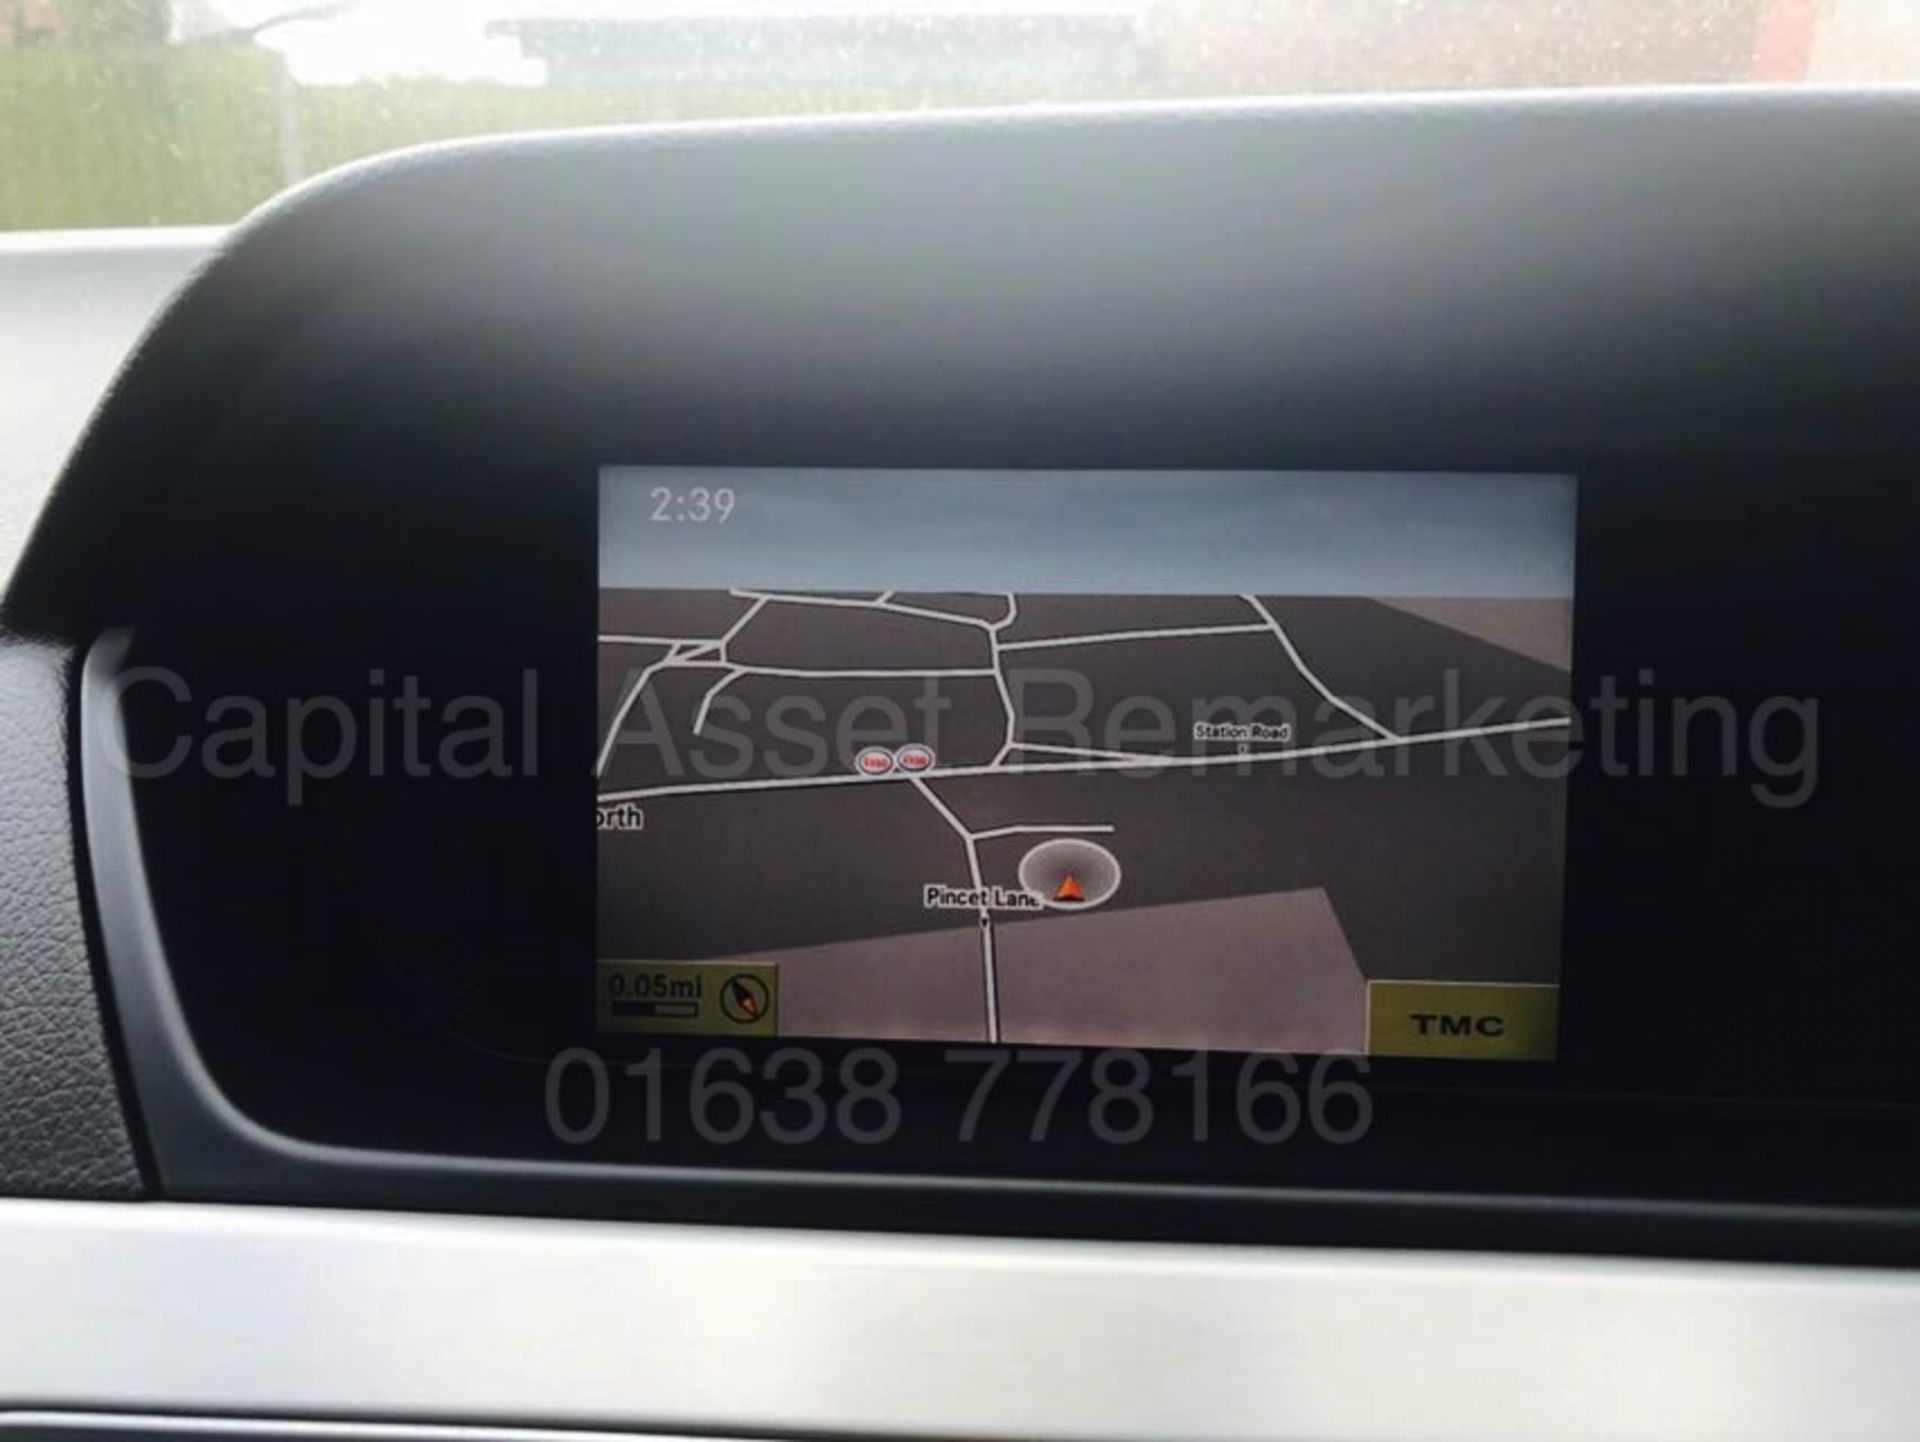 MERCEDES C220CDI "SPORT" ESTATE "125 EDITION" AUTOMATIC (2012 MODEL) SAT NAV - LEATHER - Image 14 of 19